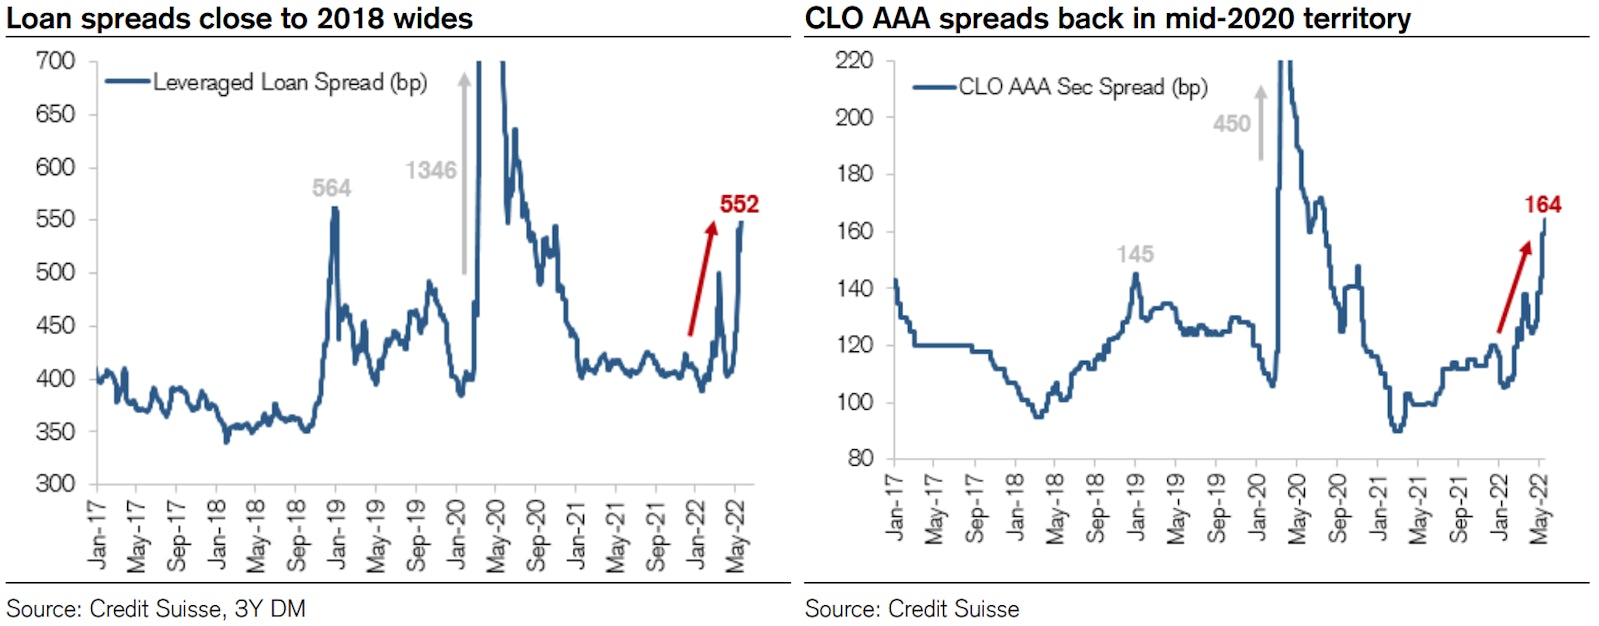 Spreads On Loans & AAA tranches of CLOs | Source: Credit Suisse